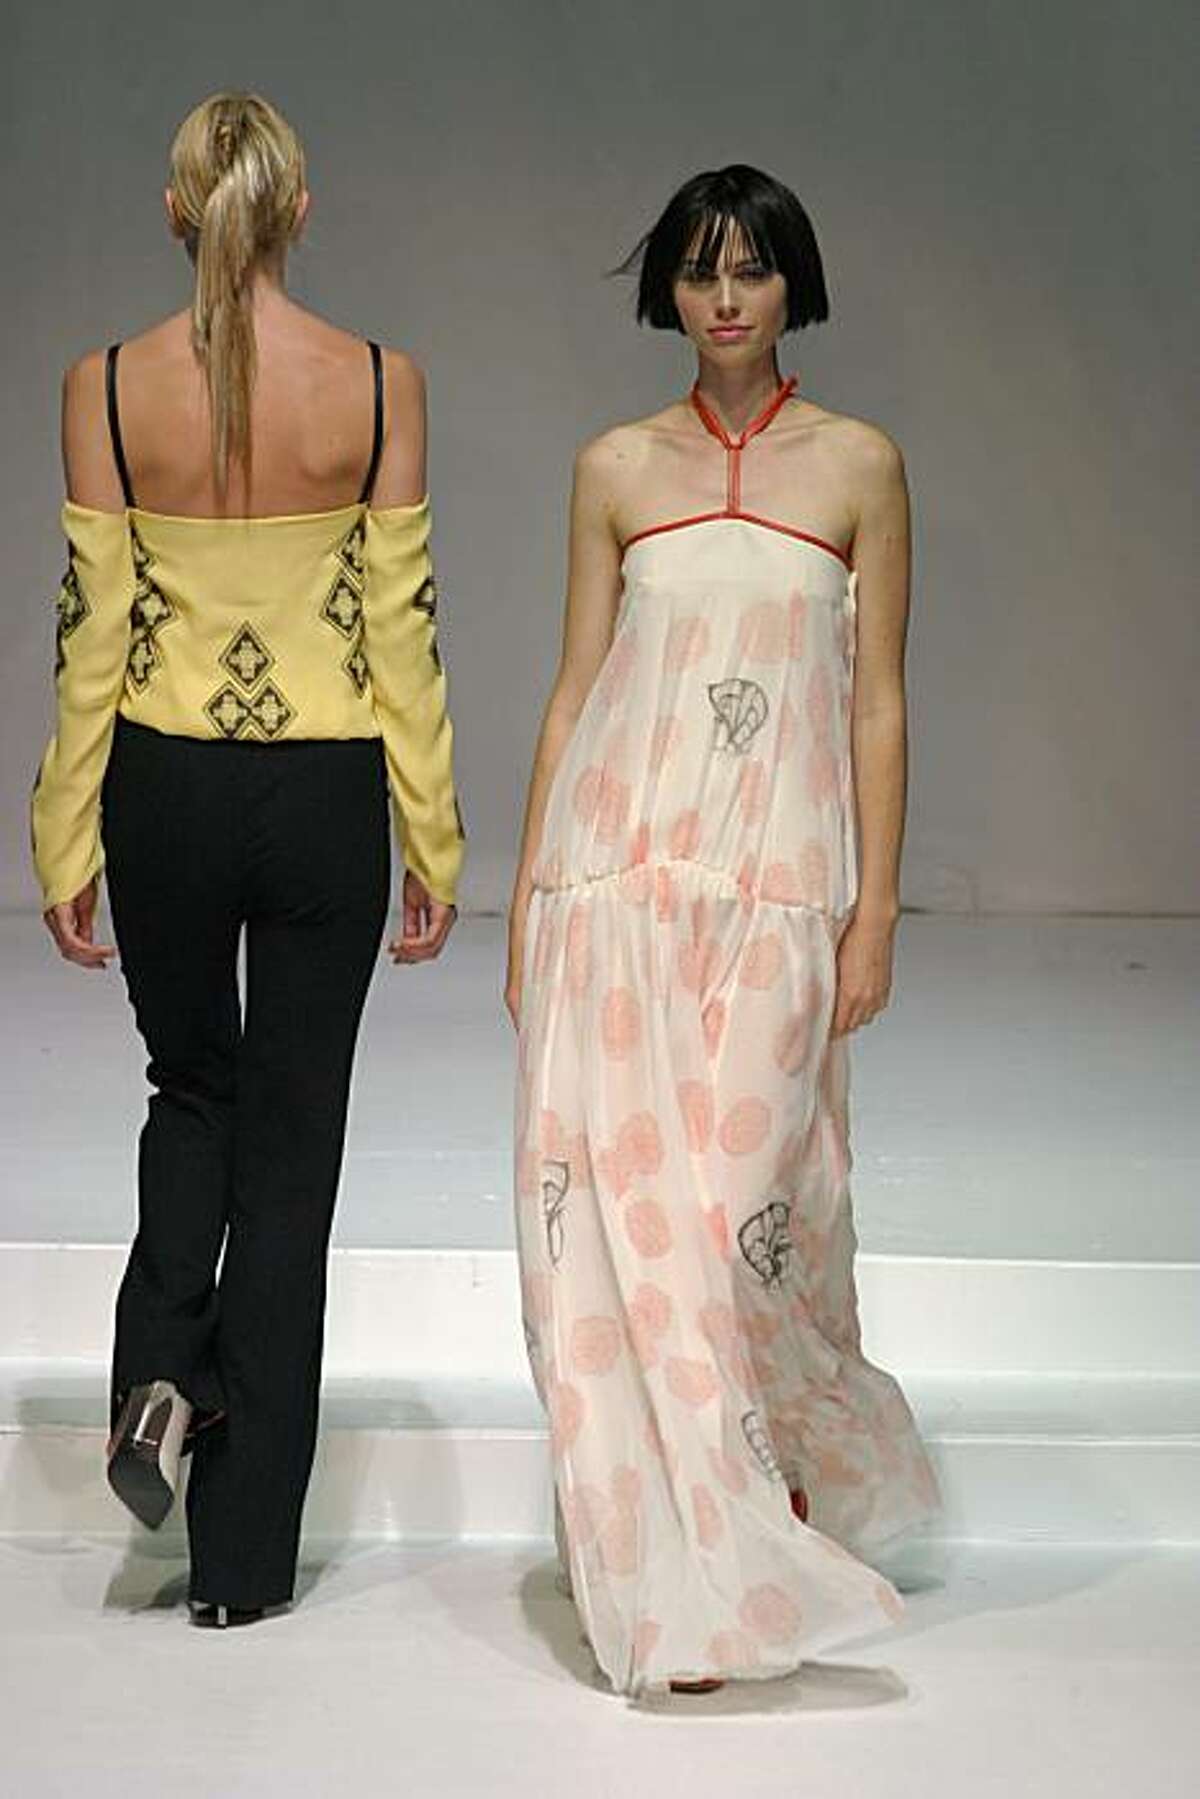 Women's wear designer Norman Ambrose, whose works are sold at Saks, Neiman Marcus and other upscale retailers, is a 2003 graduate of the Academy of Art University in San Francisco. Shown are models wearing his garments in the student showcase in 2003, filmier and looser than his now-tailored, elegant and city chic clothing.